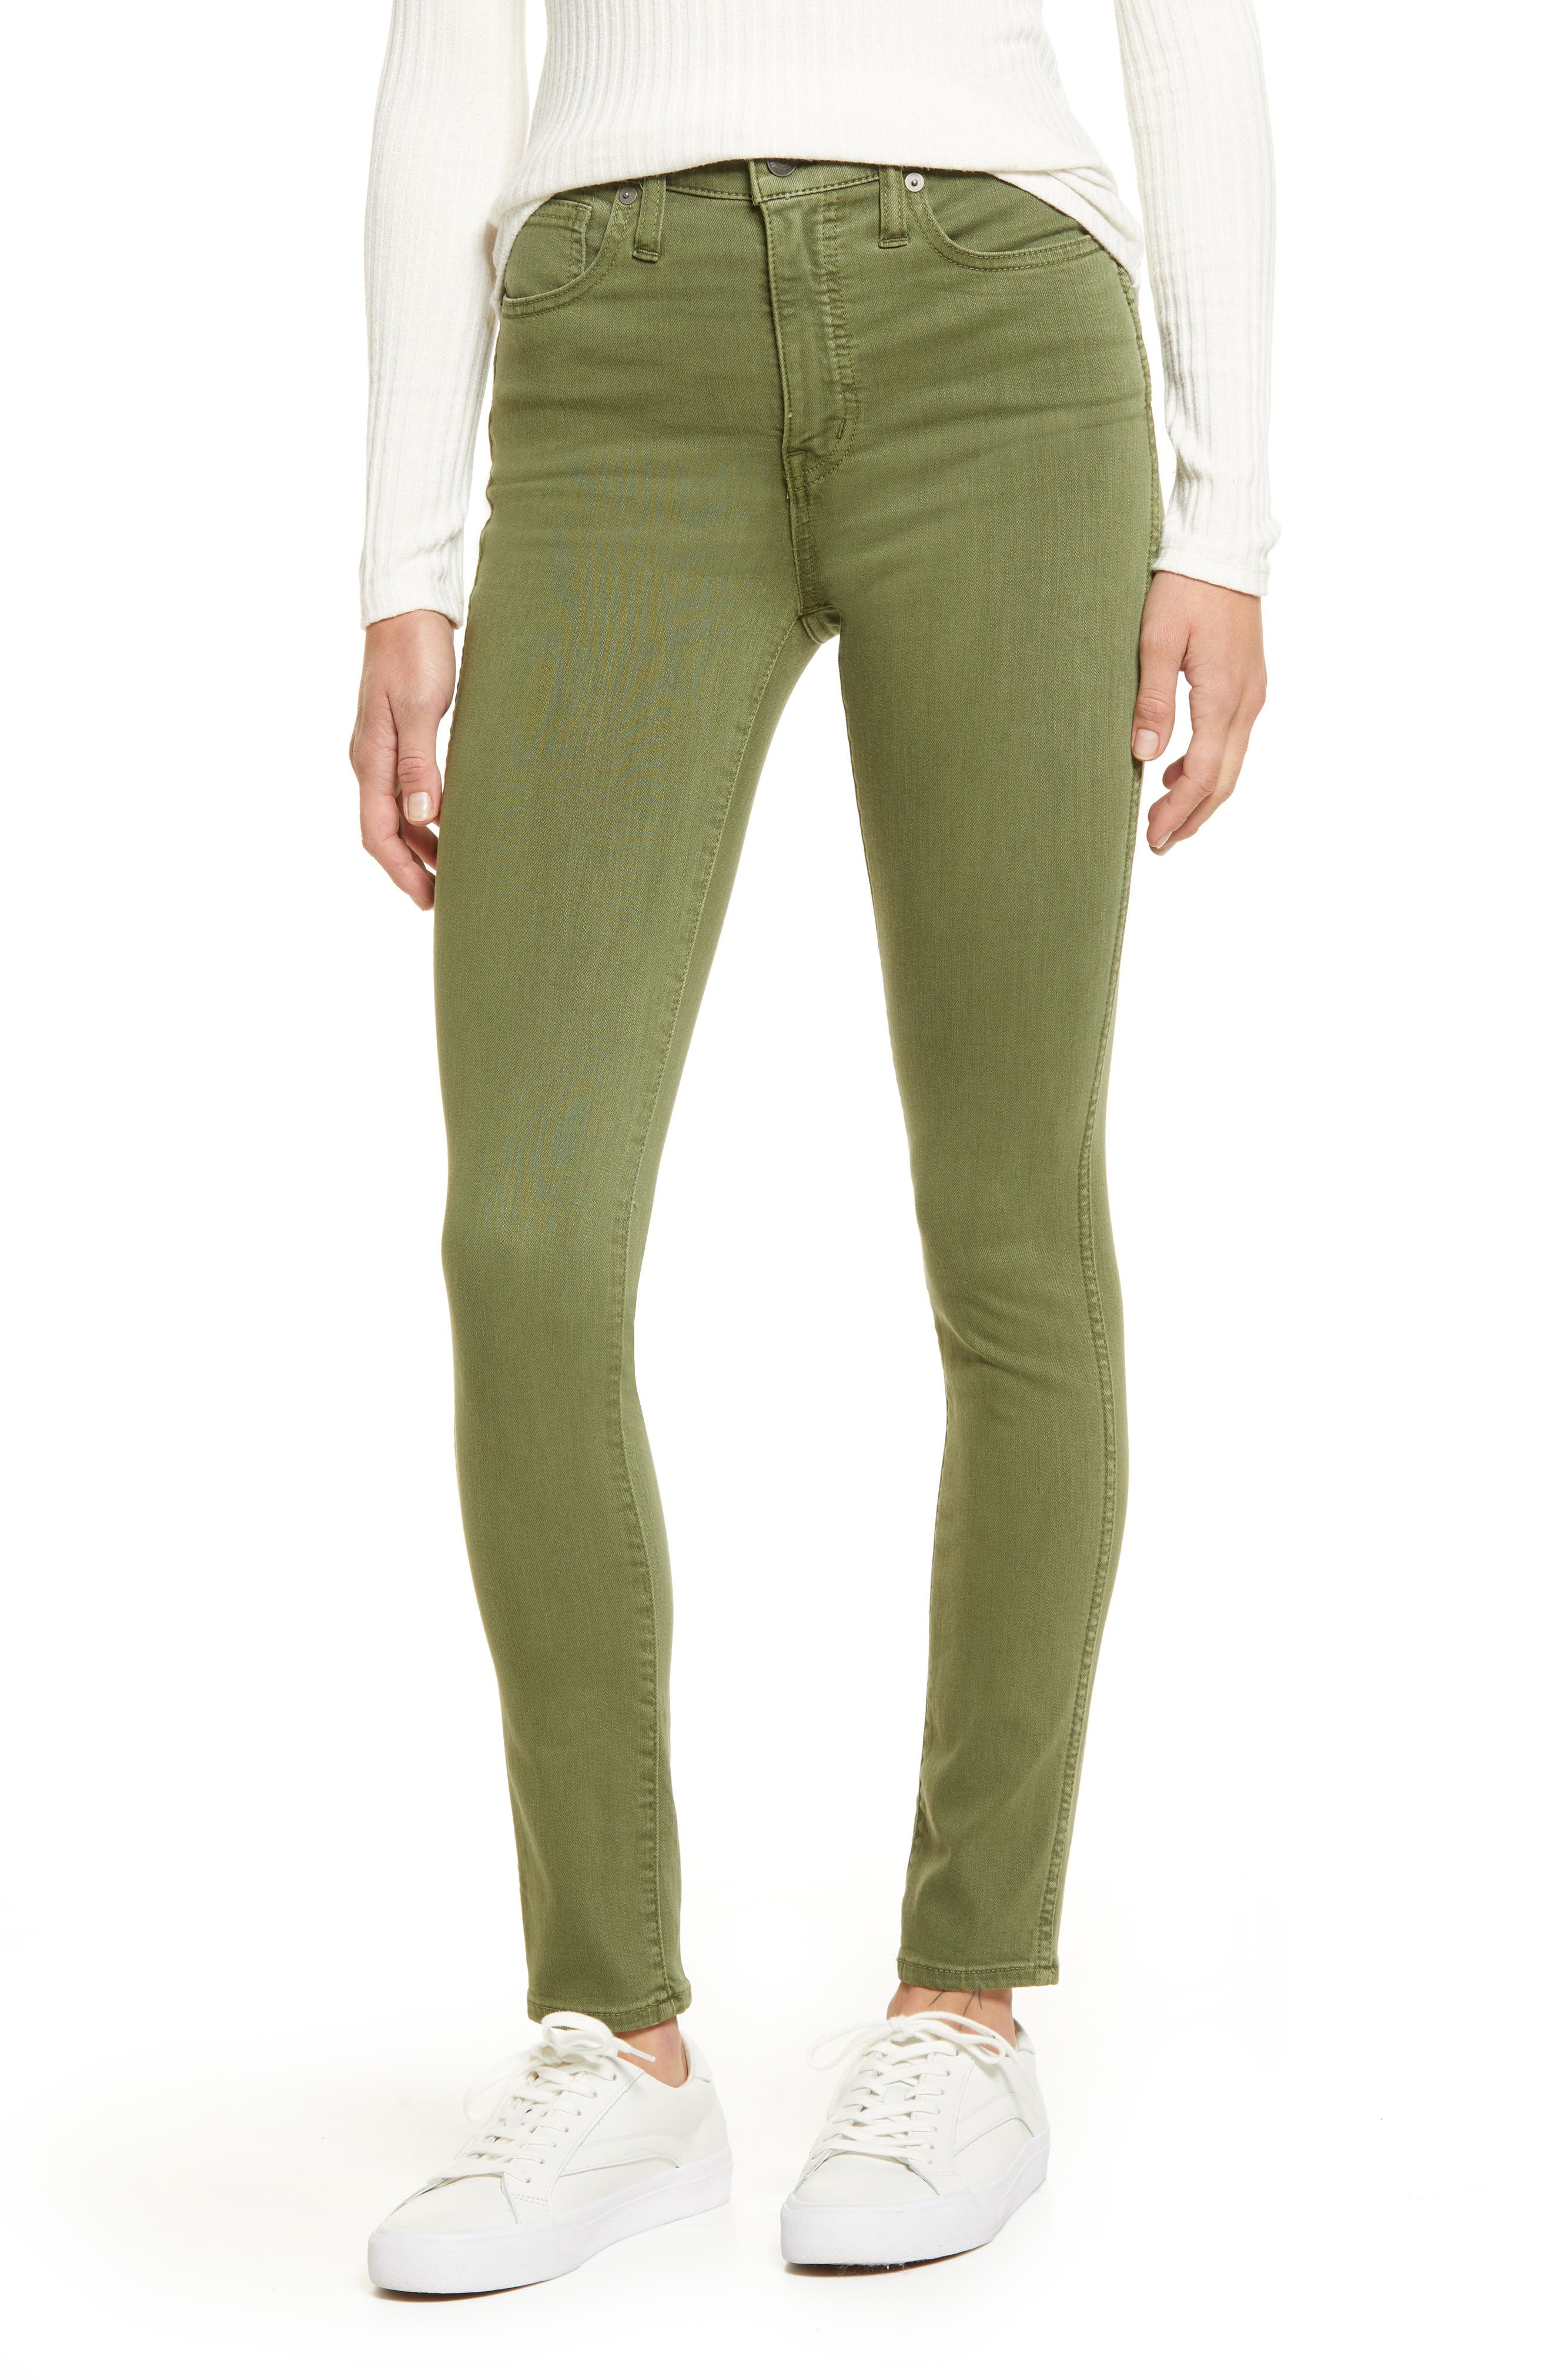 olive green jeans womens